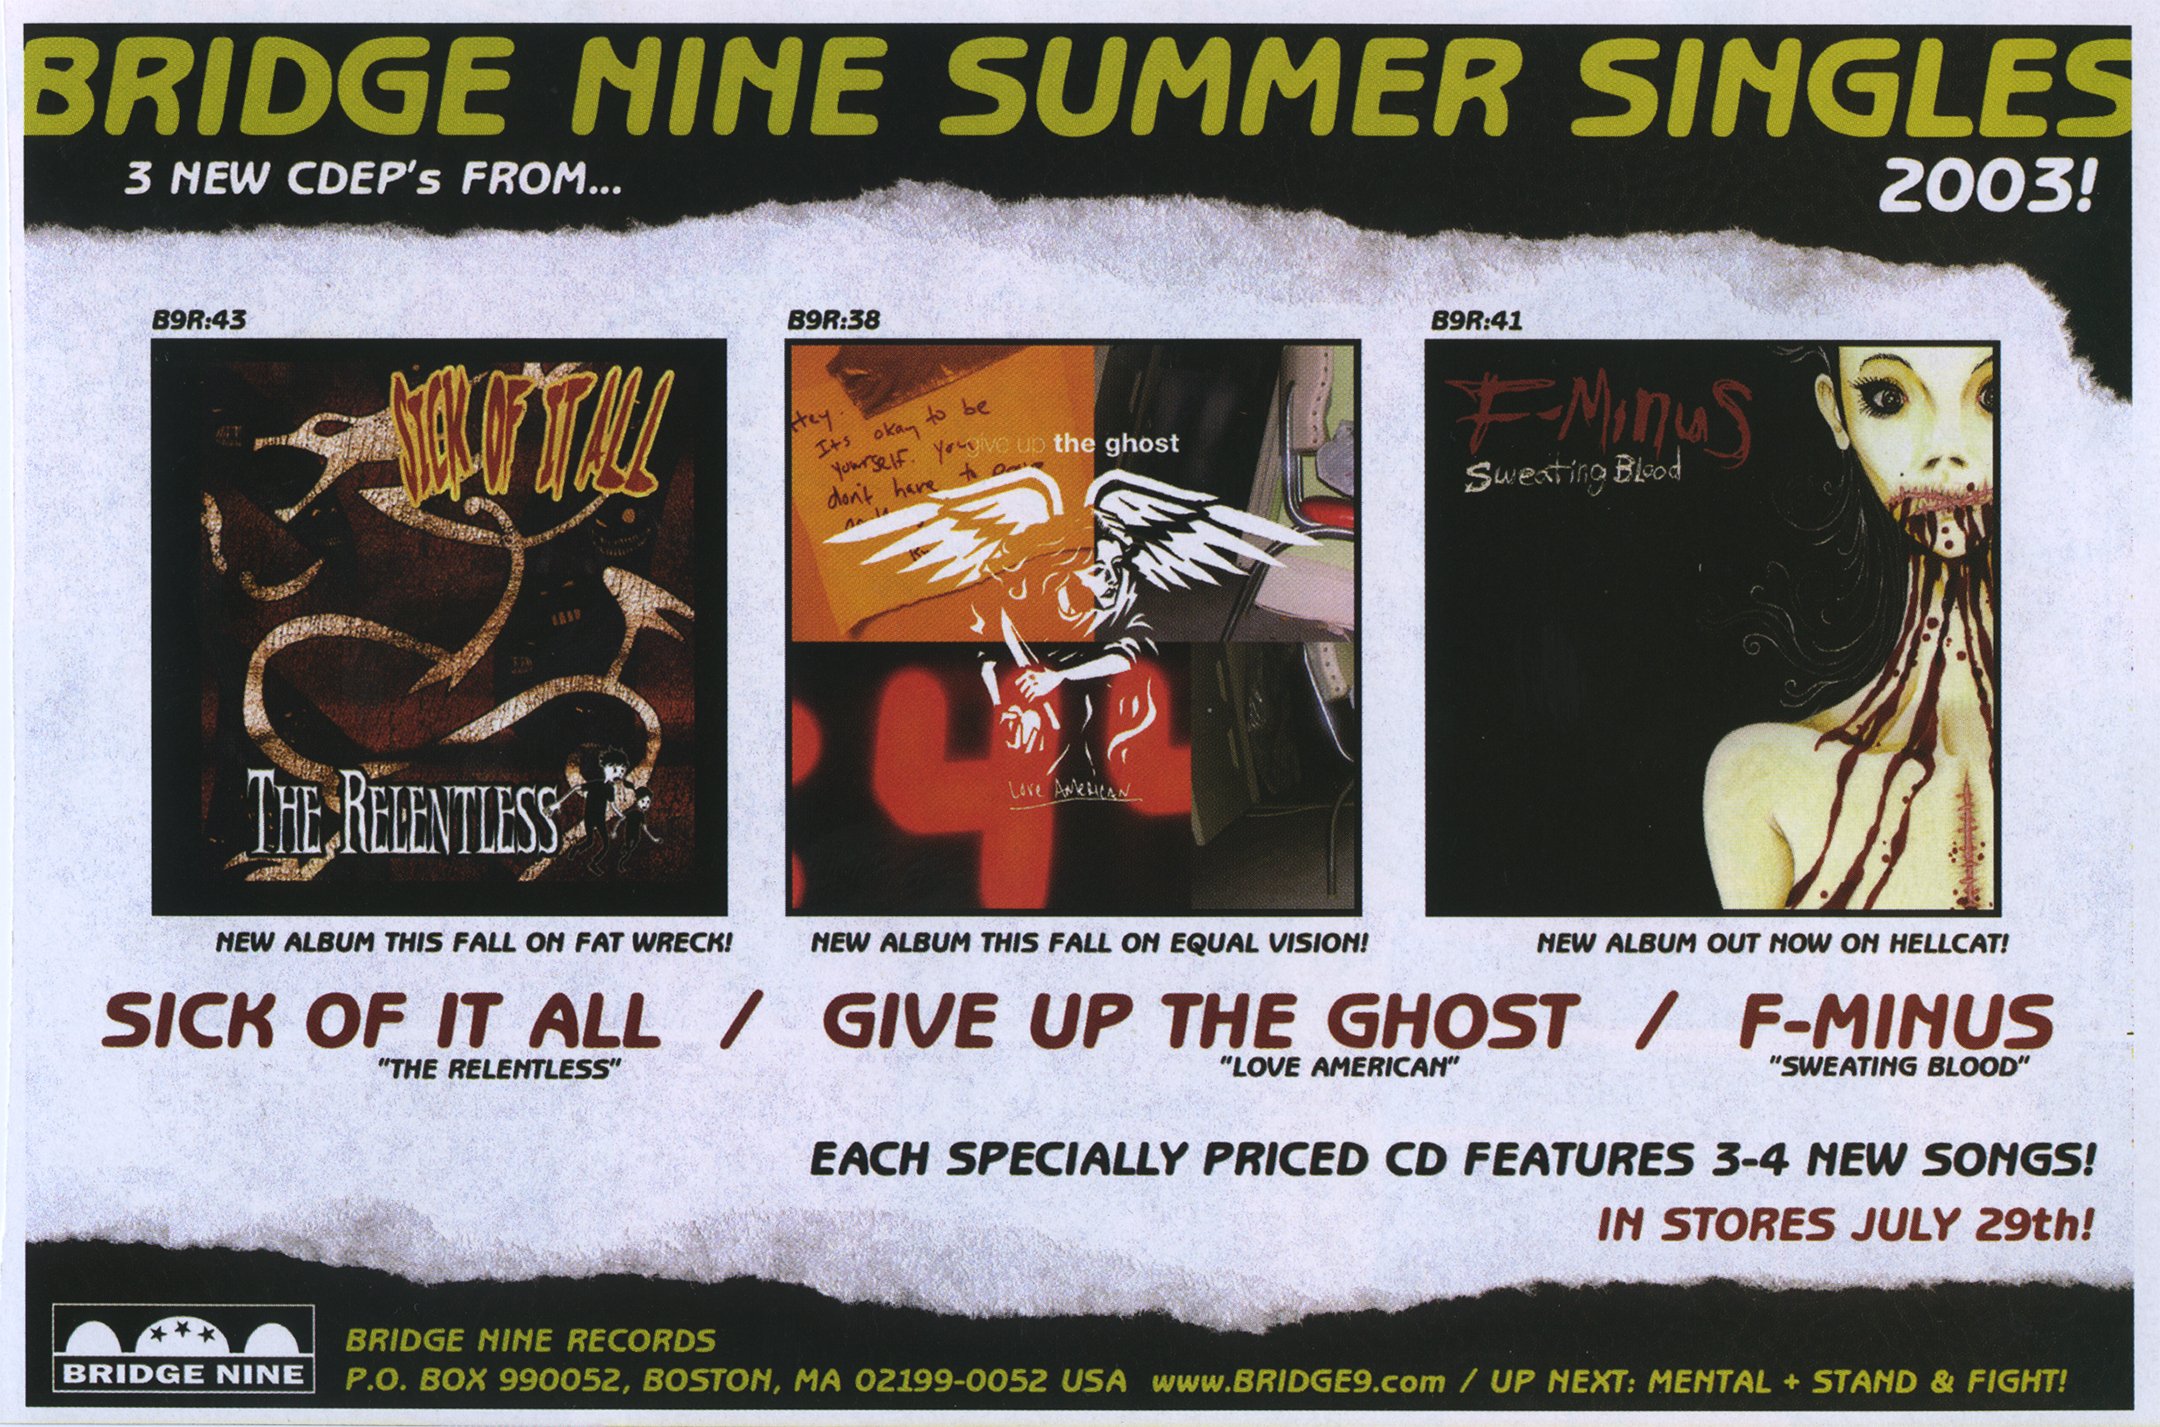 Bridge Nine half-page ad for the 2003 "Summer Singles" EPs in Law of Inertia magazine, issue #4 (Summer 2003)